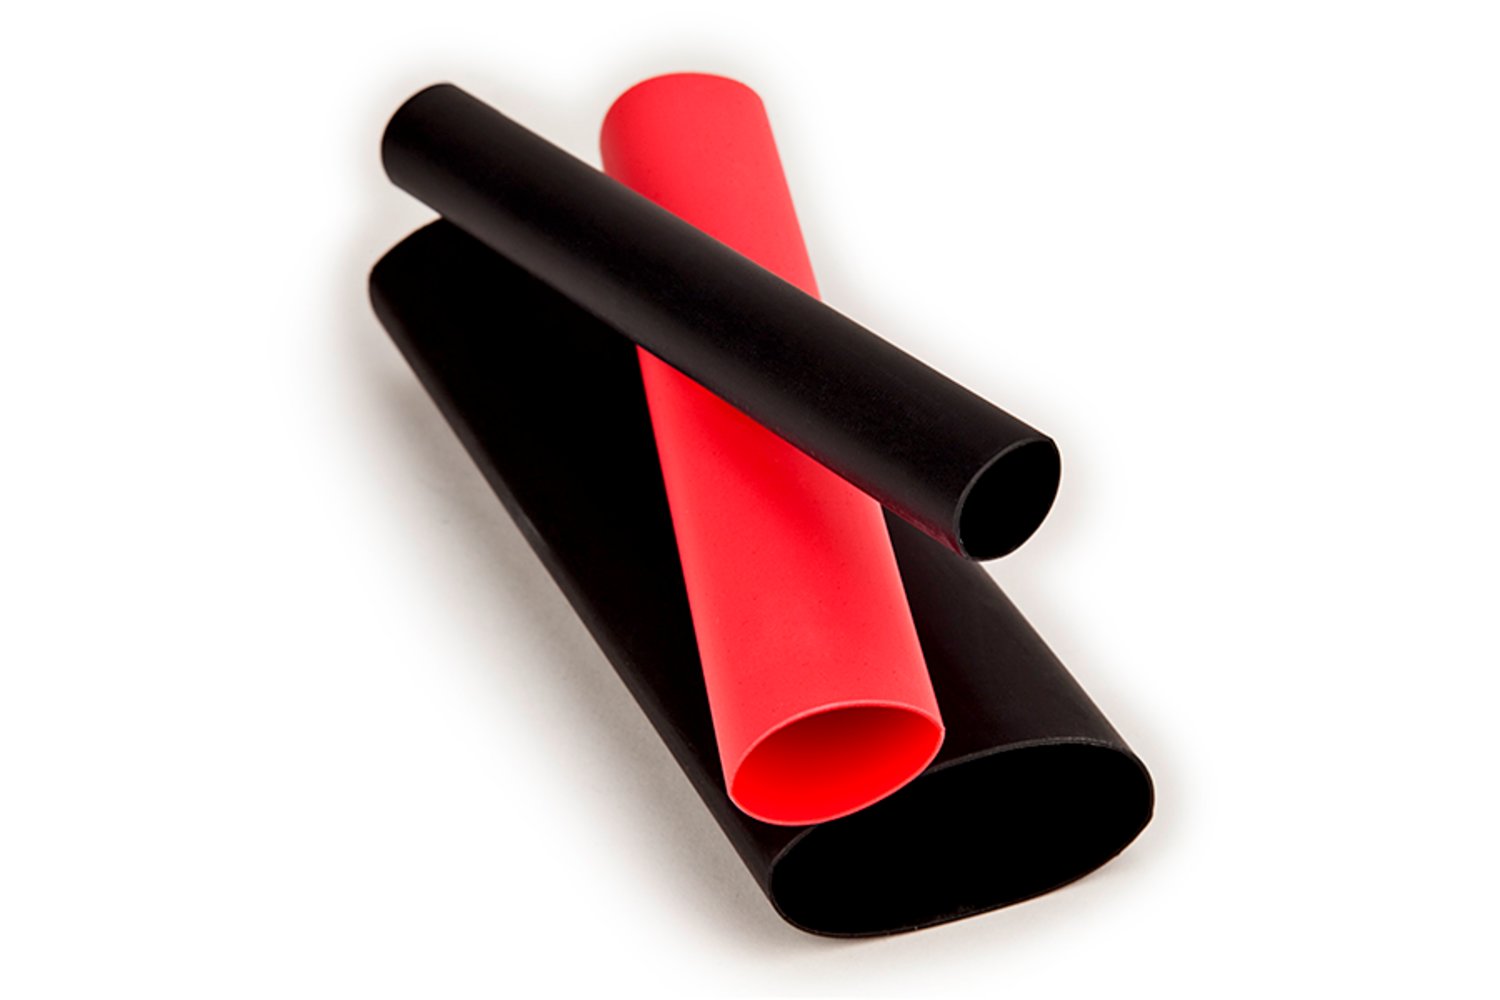 7010396537 - 3M Thin-Wall Heat Shrink Tubing EPS-300, Adhesive-Lined, 1/2" Red, 6-in
piece, 400/Case